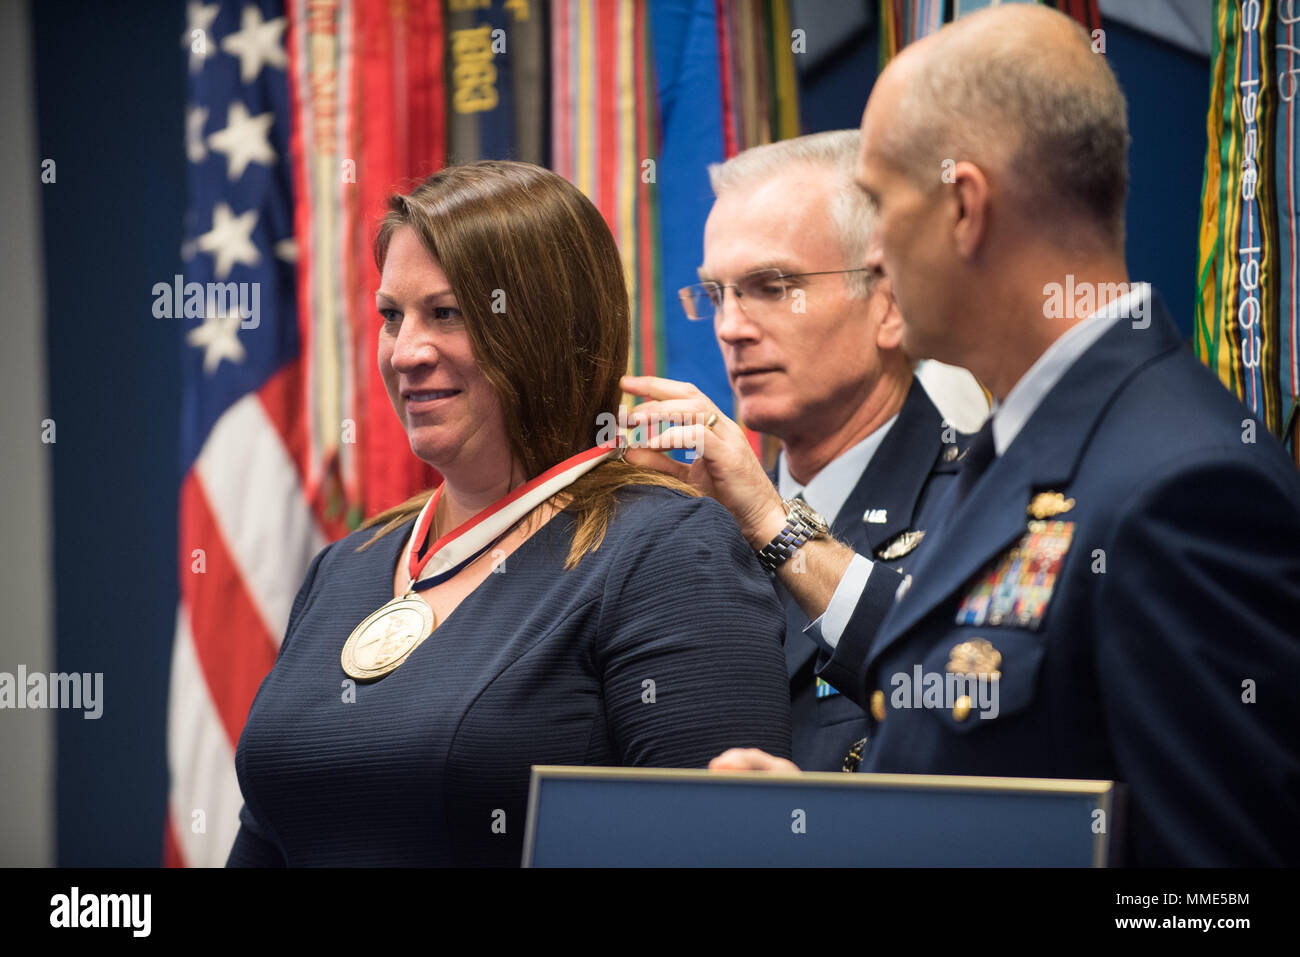 U.S. Air Force Gen. Paul J. Selva, Vice Chairman of the Joint Chiefs of Staff, places the award on Ann O' Connor, accepting on behalf of Trees for Troops - the U.S. Coast Guard awardee, during the 2017 Spirit of Hope Awards at the Hall of Heroes in the Pentagon, Oct. 26, 2017. The Spirit of Hope Award is awarded to men and women of the U.S. Armed Forces, entertainers, and other distinguished Americans and organizations whose patriotism and service reflect that of Mr. Bob Hope. The recipients selflessly contributed an extraordinary amount of time, talent, or resources to significantly enhance t Stock Photo